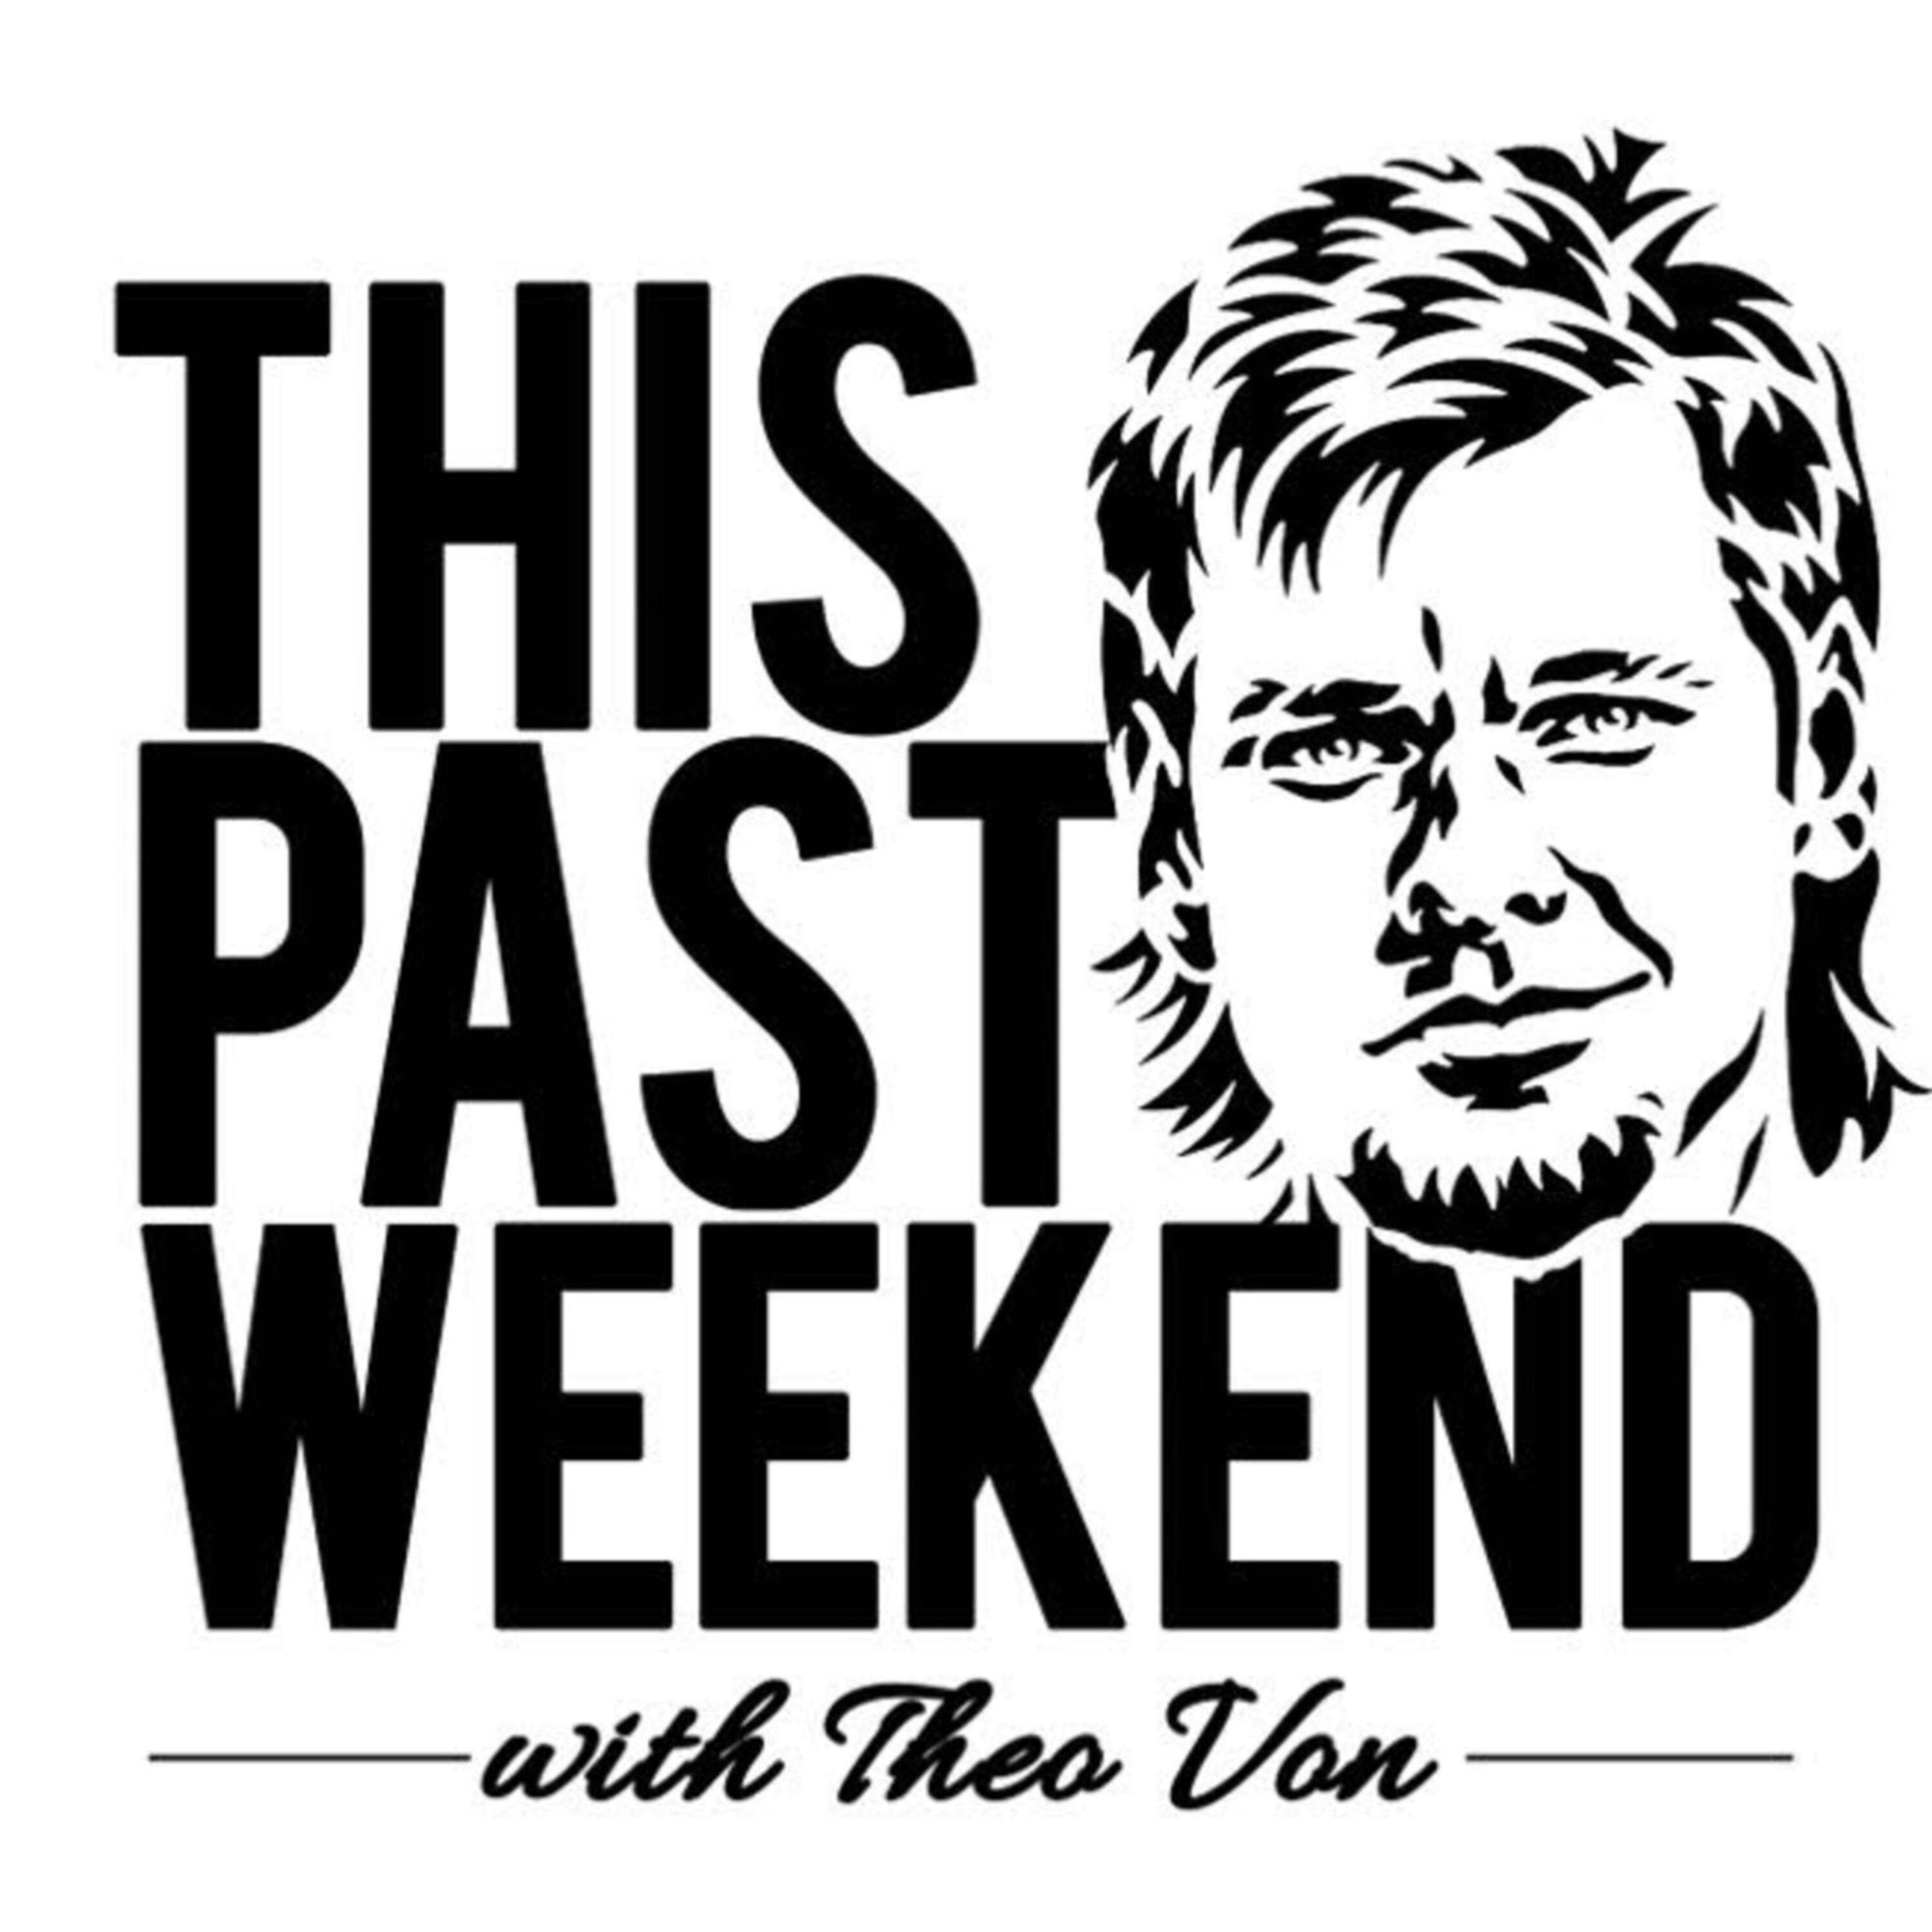 Dr. David Perlmutter | This Past Weekend #187 by Theo Von